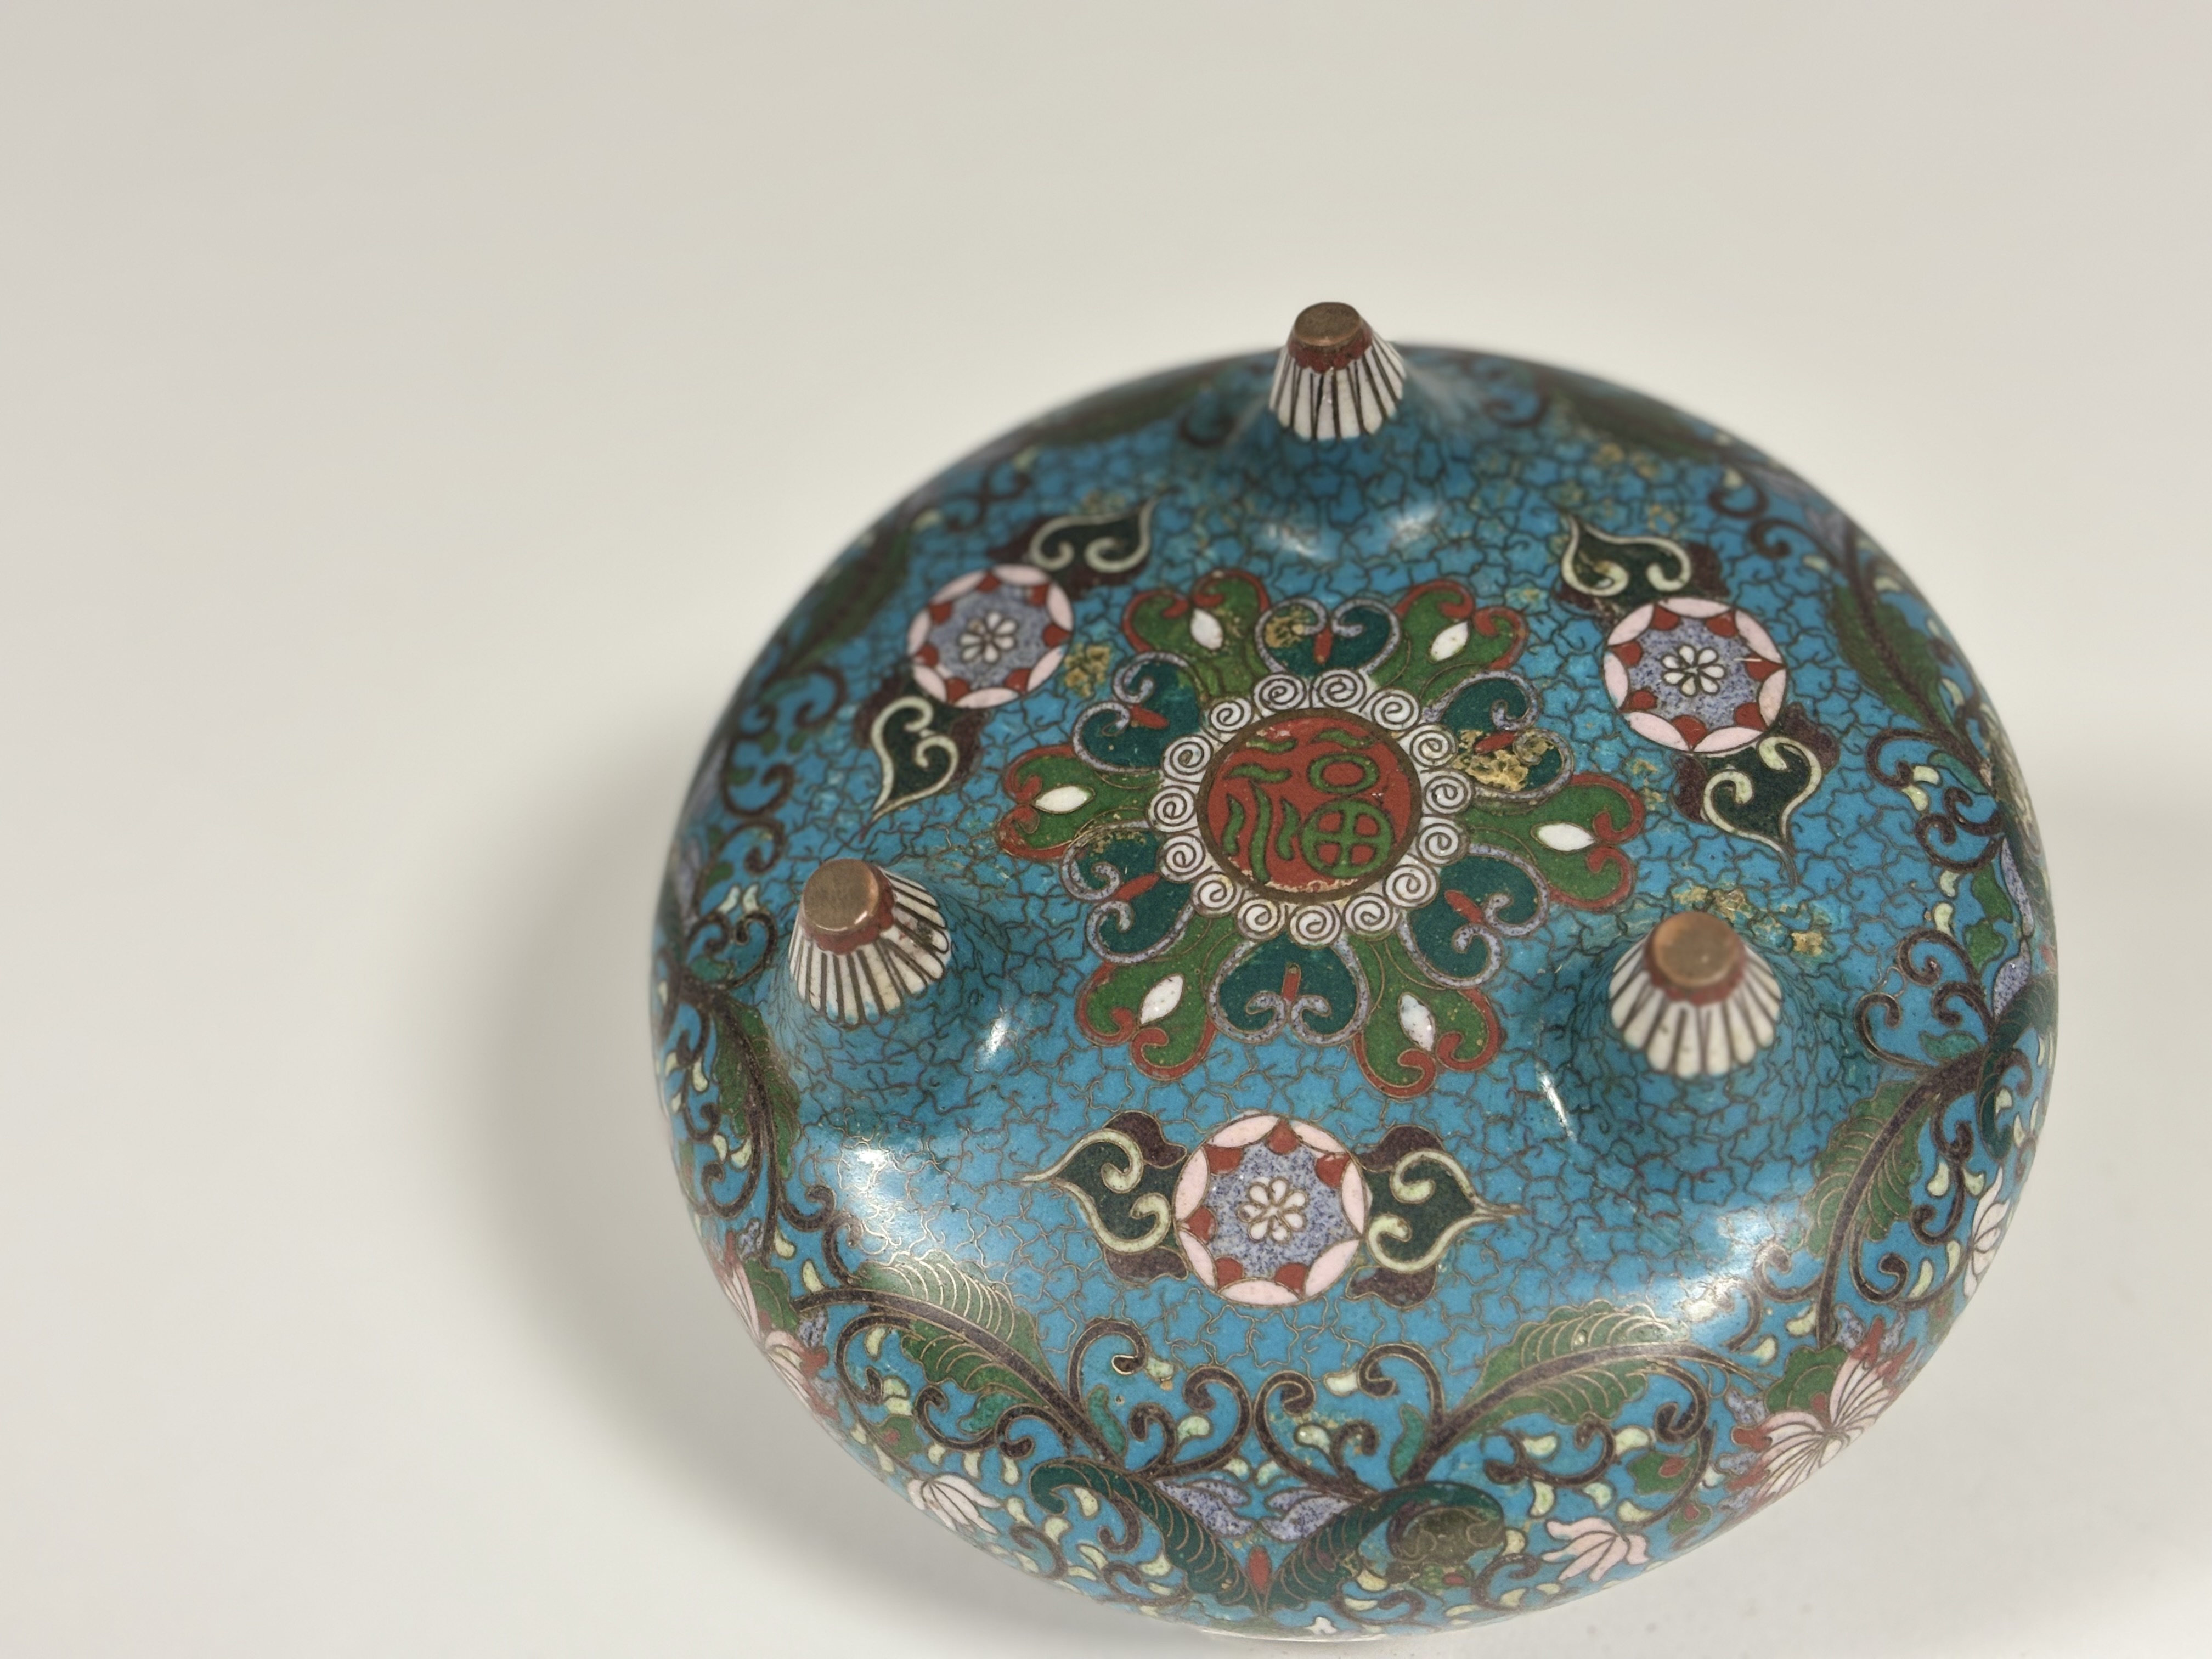 A Japanese cloisonne enamel koro or censer, early Meiji period, decorated with stylised lotus - Image 4 of 4